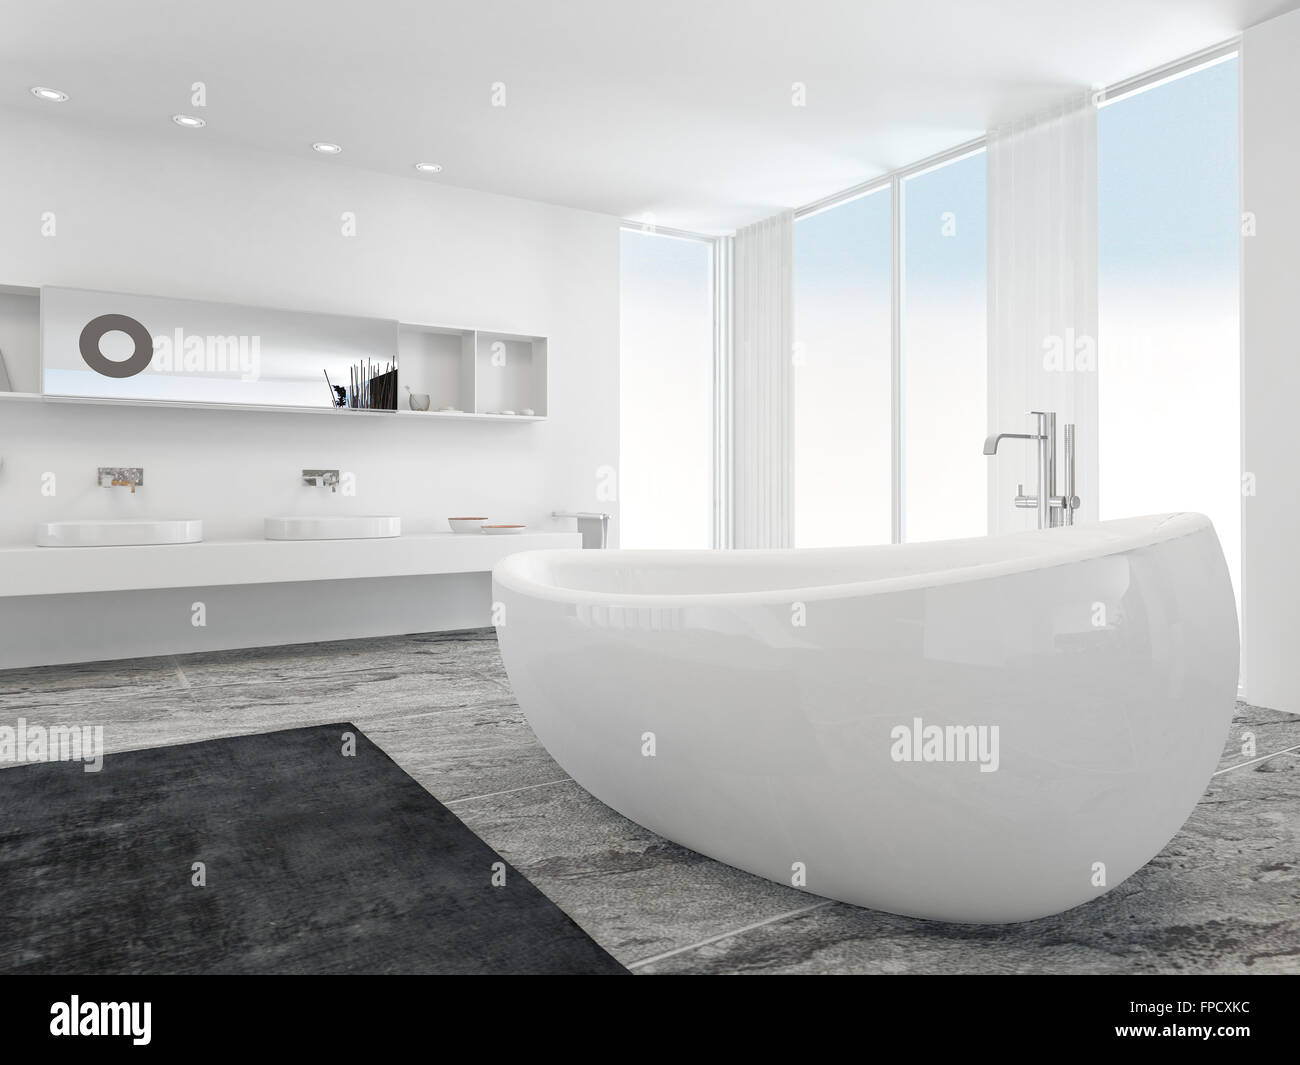 Very Spacious Bright Modern Bathroom Interior With Floor To